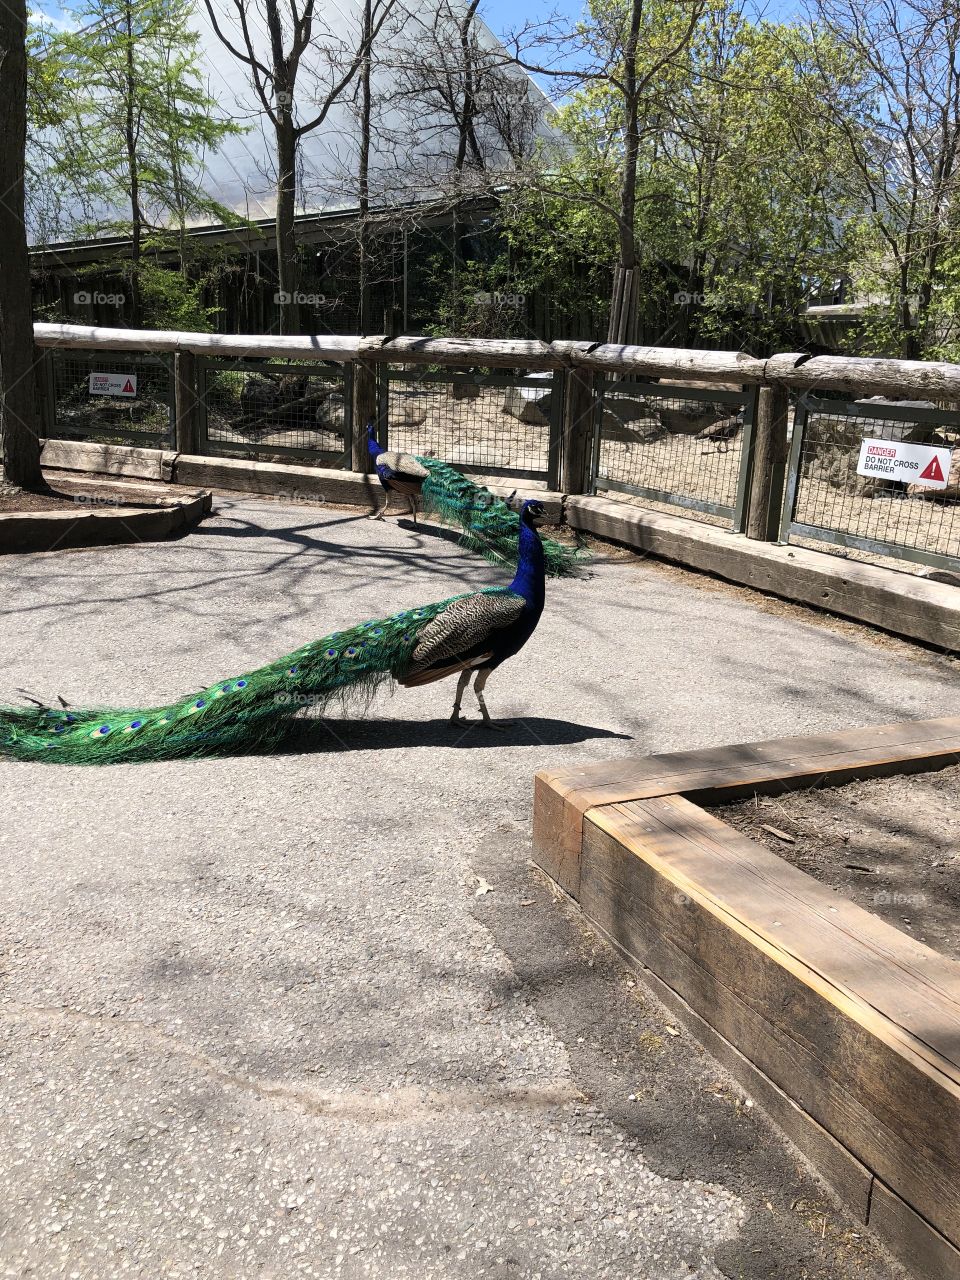 Beautiful peacock strutting across it's enclosure at the Toronto Zoo